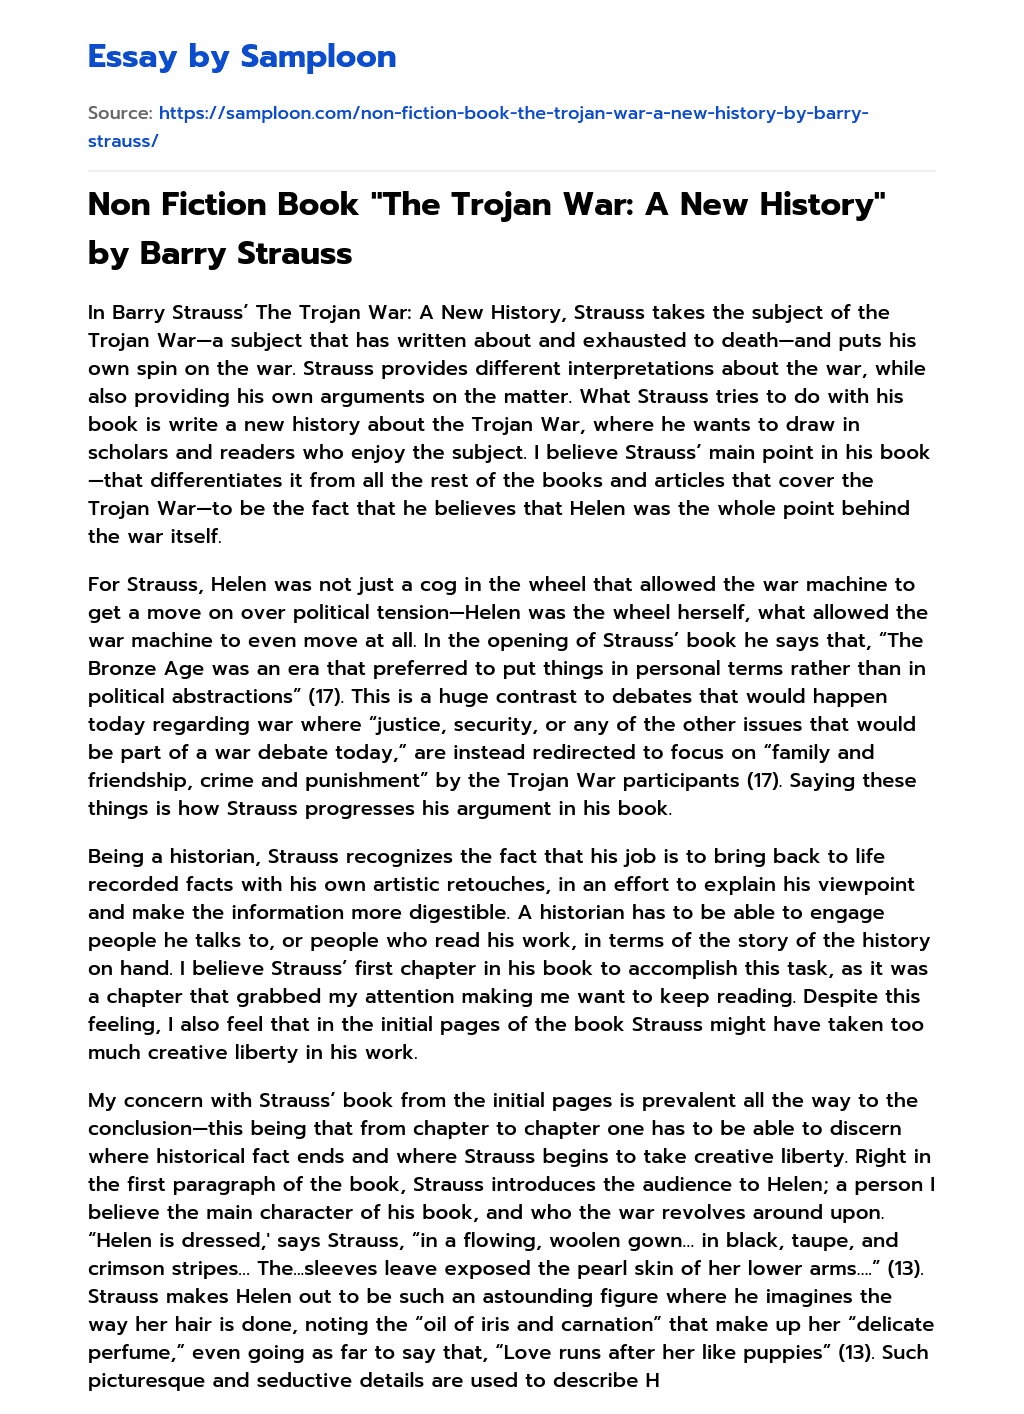 Non Fiction Book “The Trojan War: A New History” by Barry Strauss Summary essay